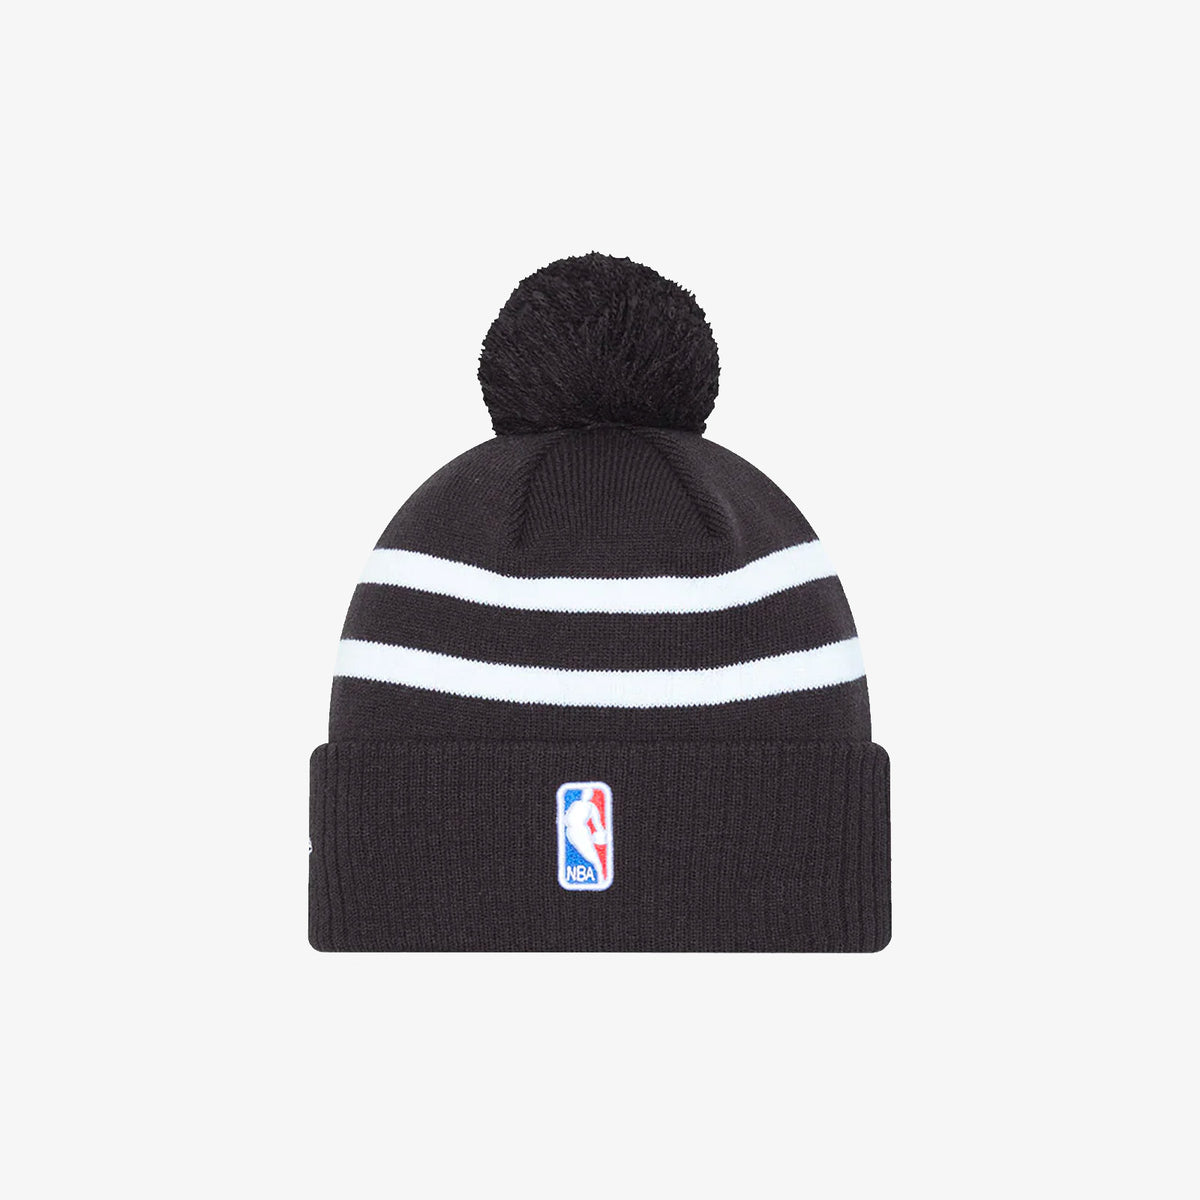 Los Angeles Clippers 9Fifty City Edition Beanie